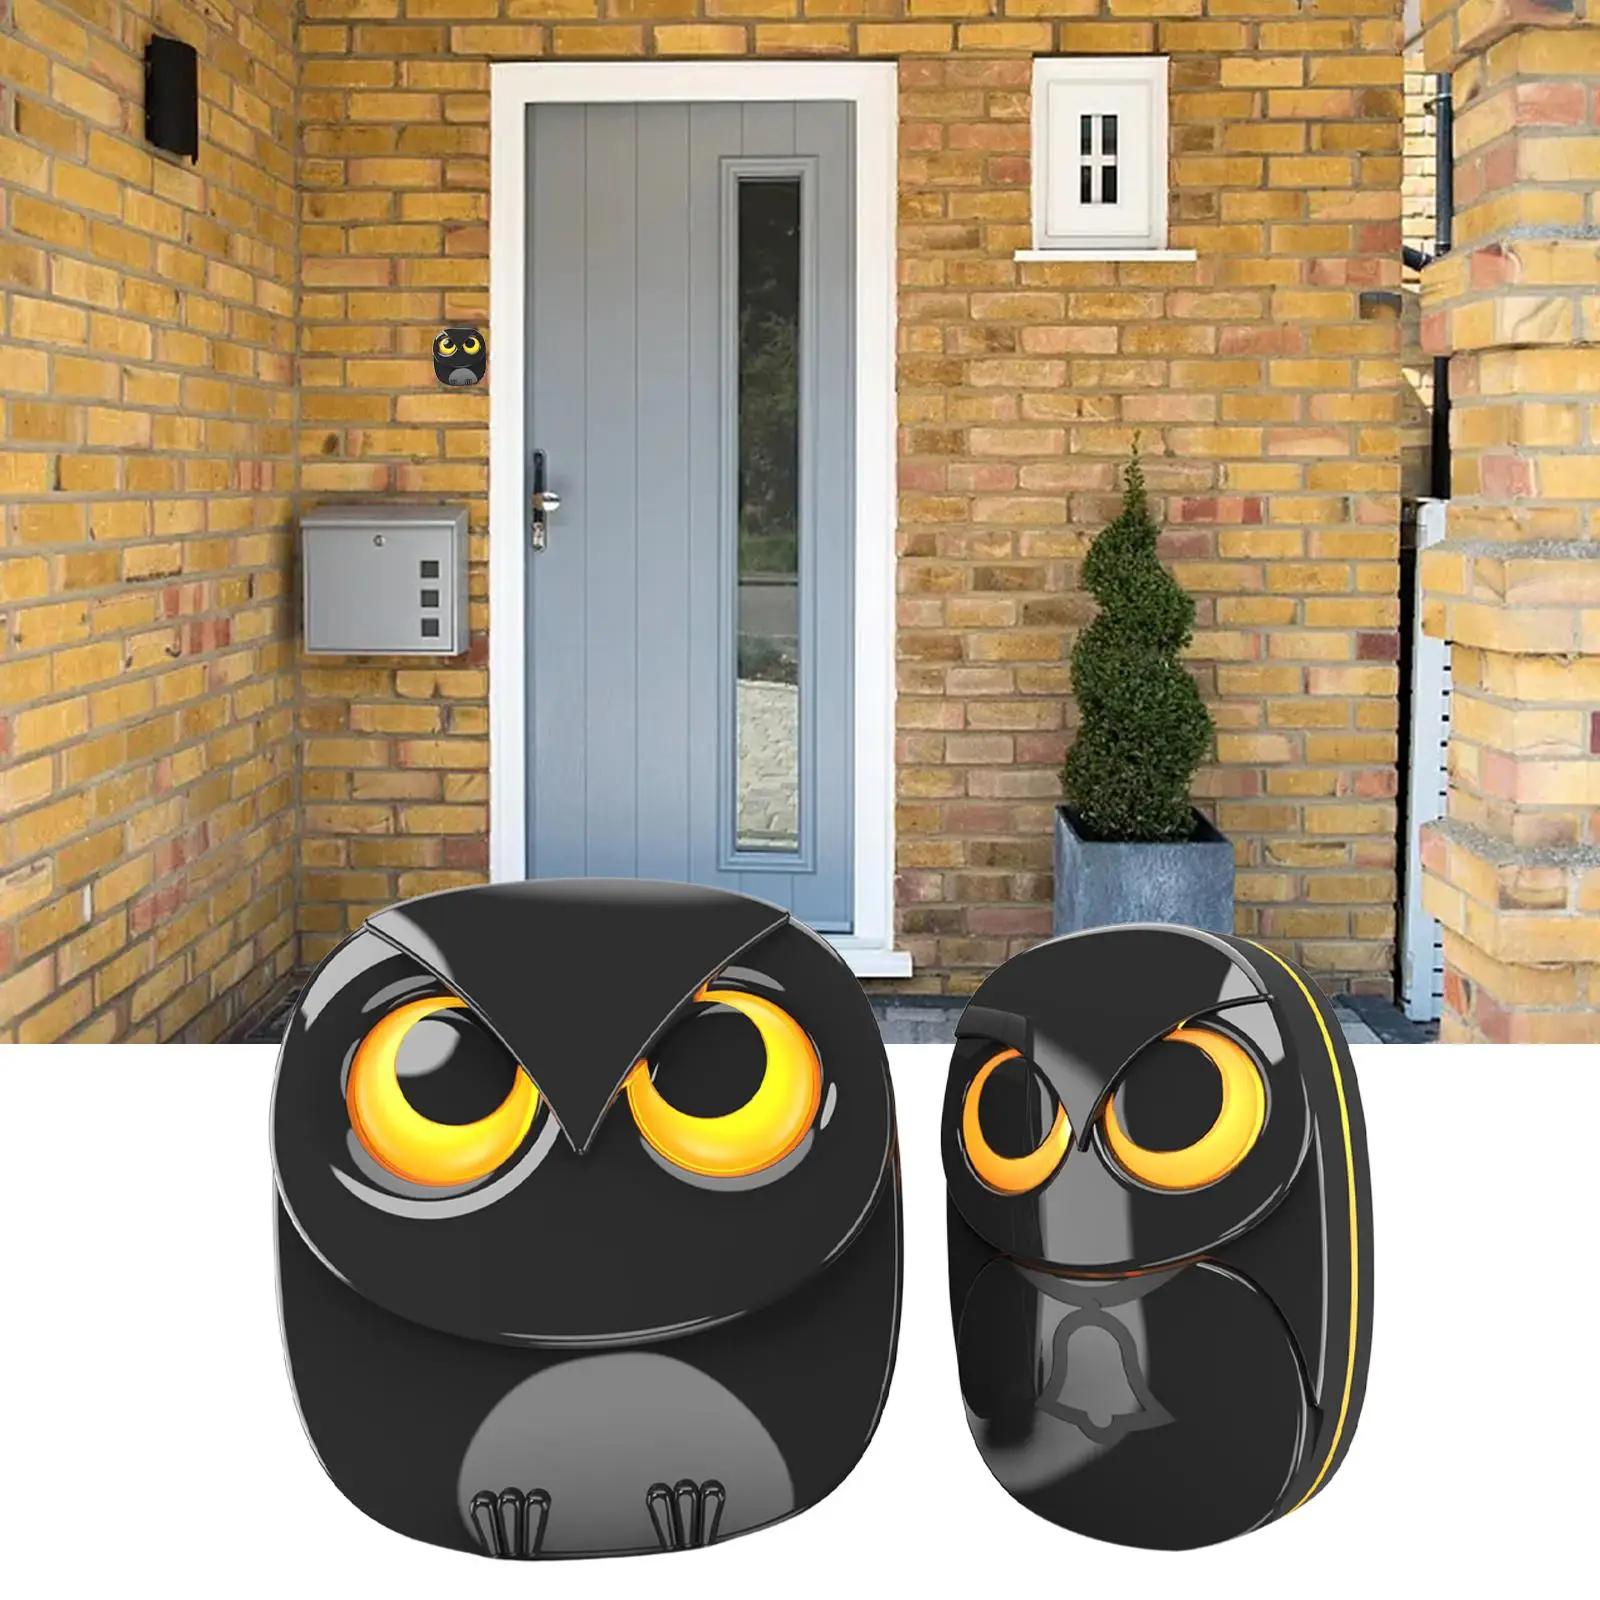 Wireless Driveway Security Alarm Easy Installation Convenient Durable Motion Sensor and Detector for Gate EU Plug